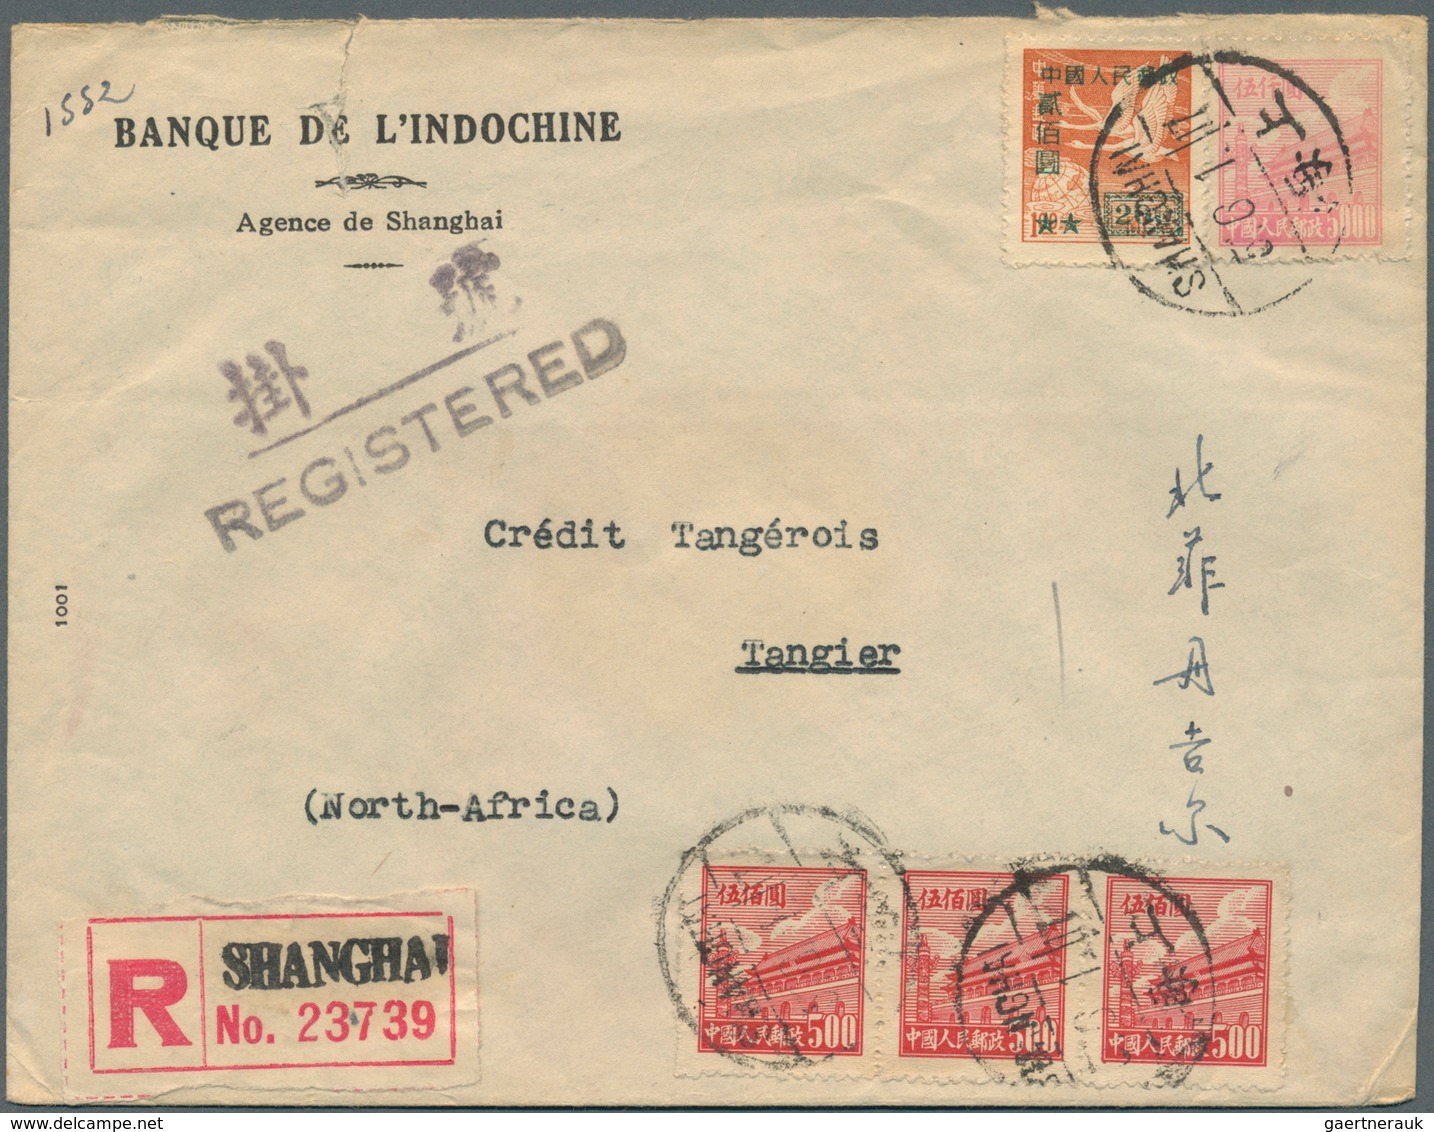 China - Volksrepublik: 1950/53, five air mail covers with Tien An Men issues inc. four registered to